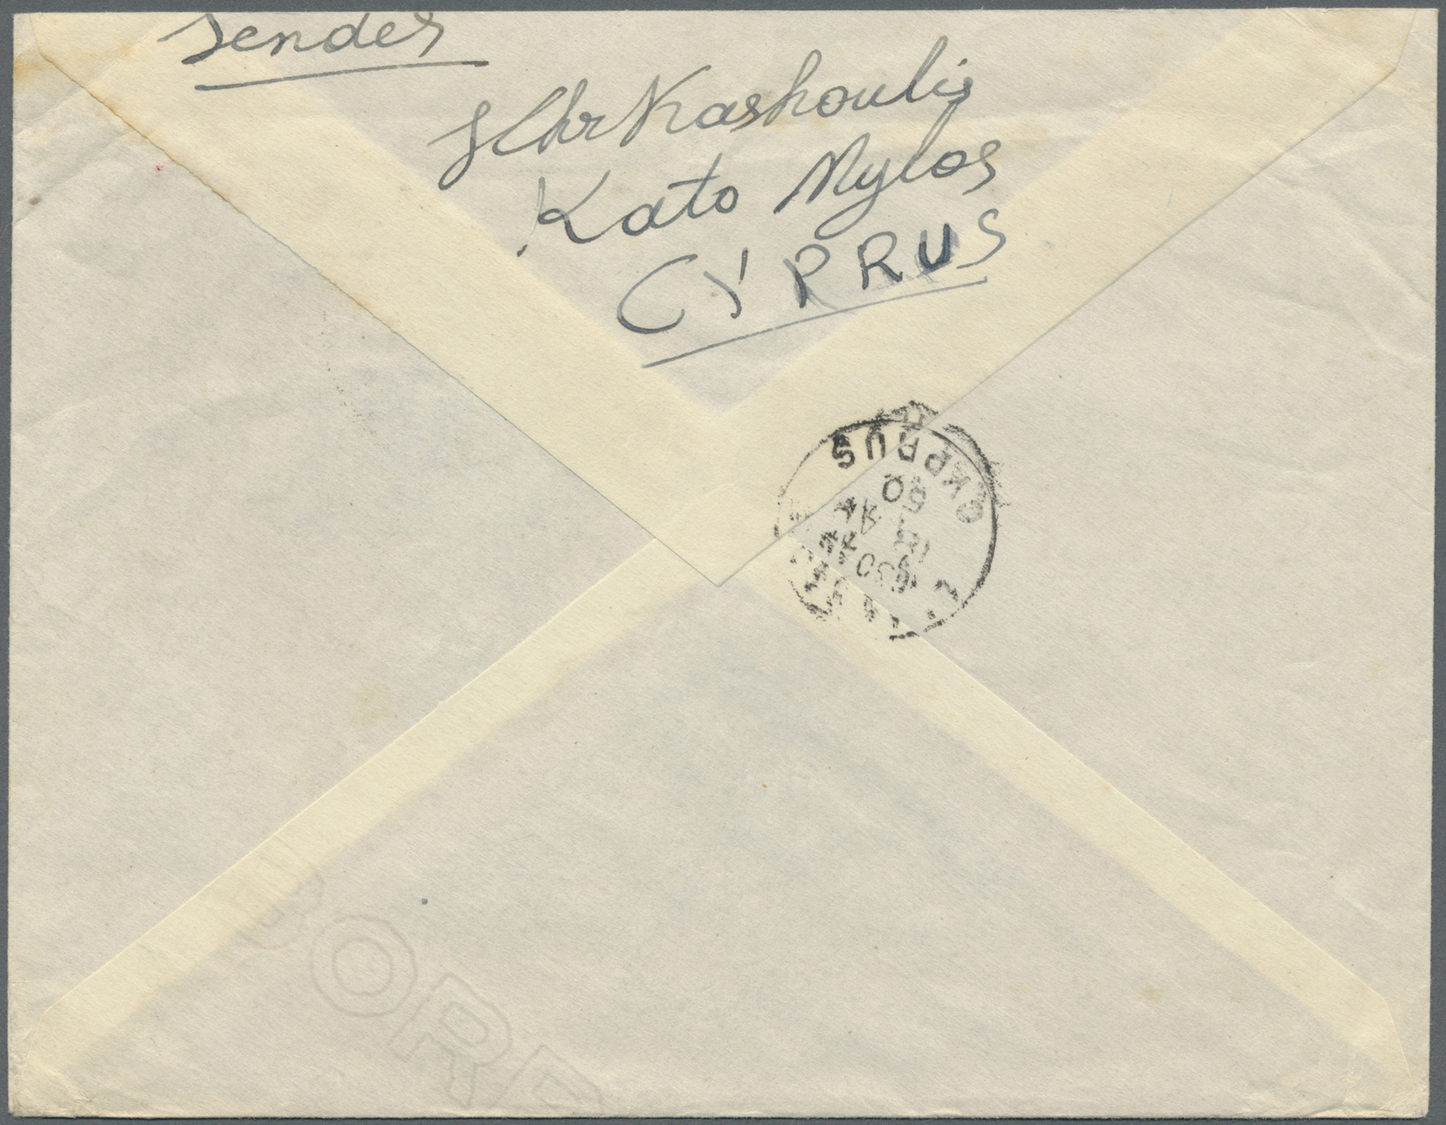 Br Zypern: 1950. Envelope Addressed To Wales Bearing SG 155b, 2p Carmine And Black Tied By Ayios-loannis-Agrou/G. - Other & Unclassified